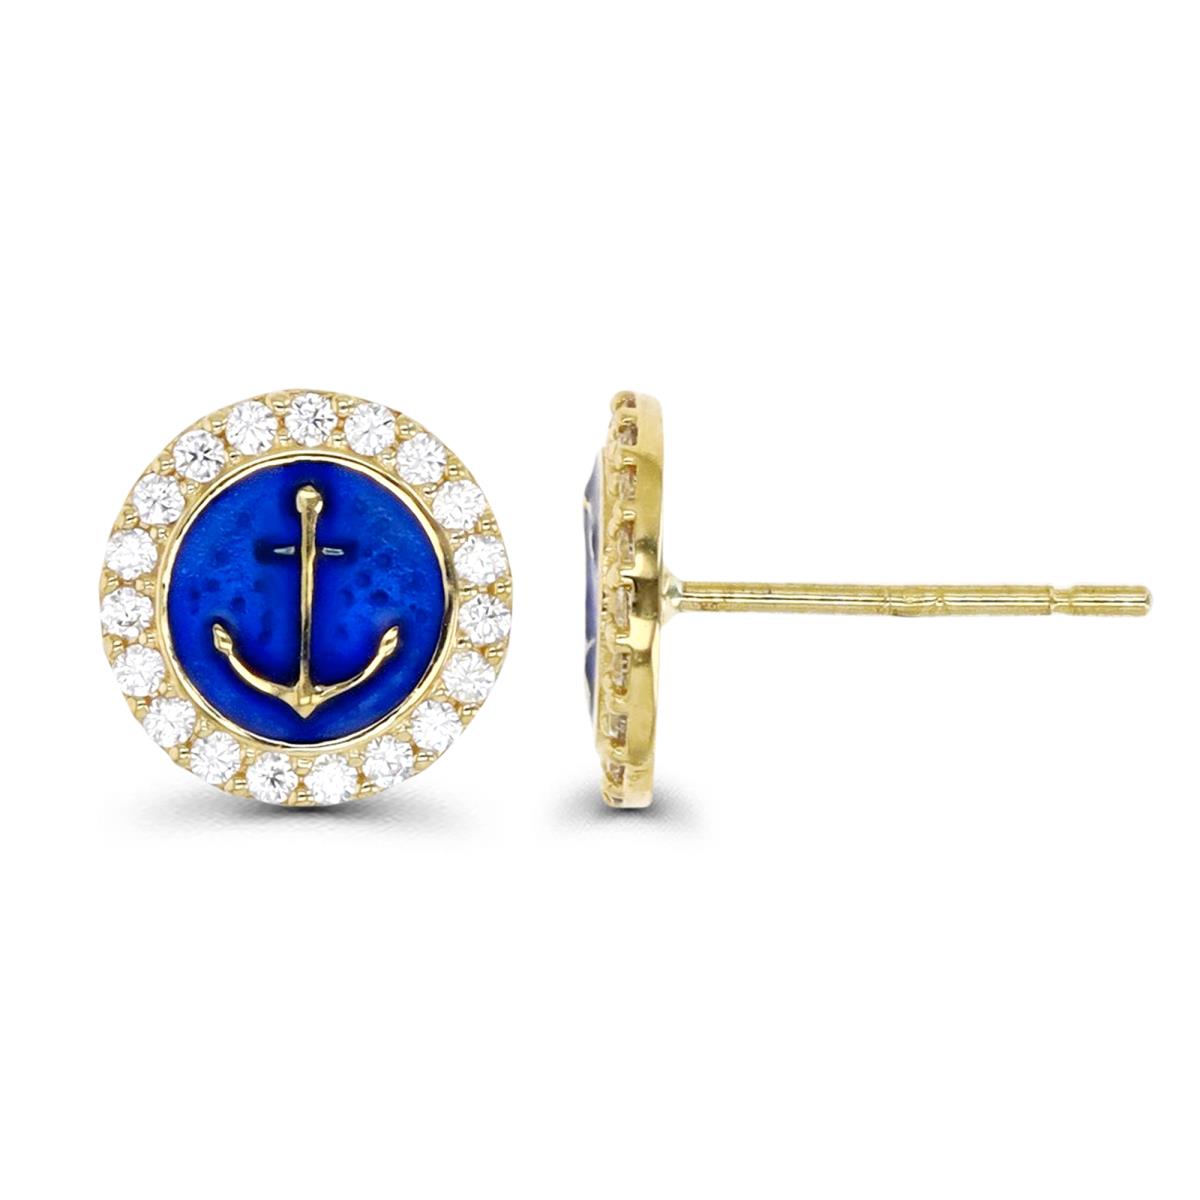 10K Gold Yellow & White CZ and Enamel Anchor Earring